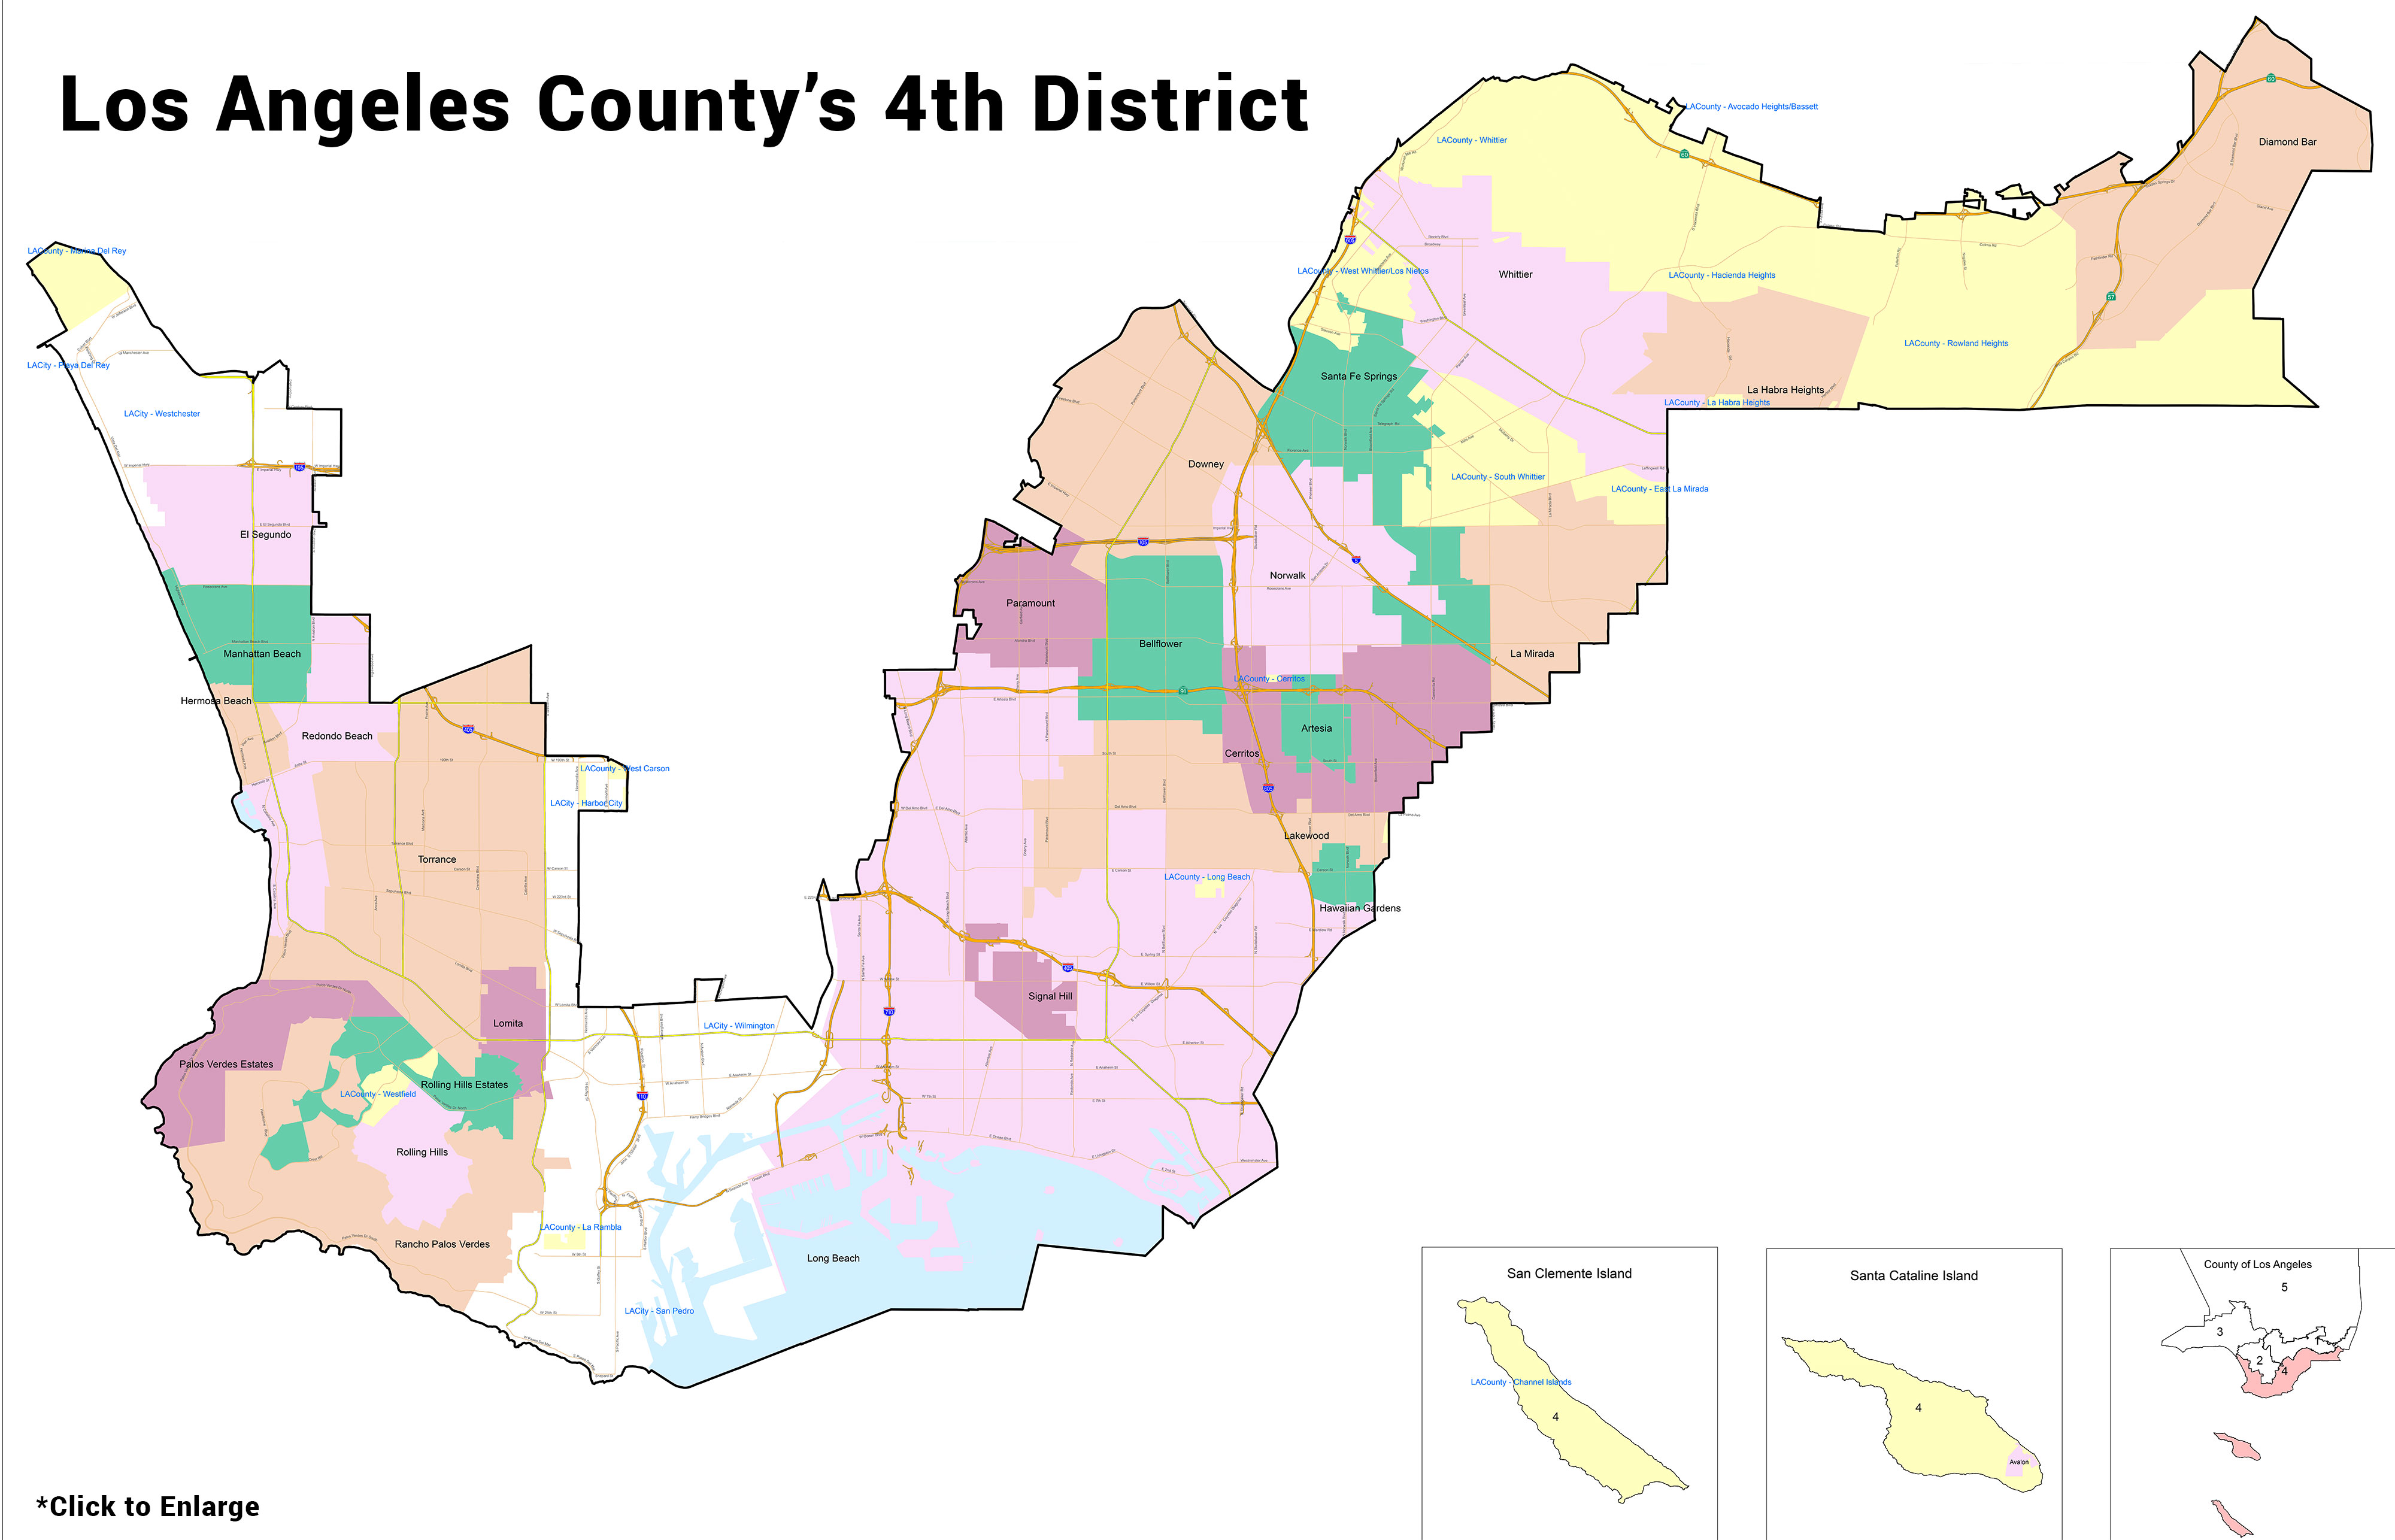 Los Angeles County's 4th District